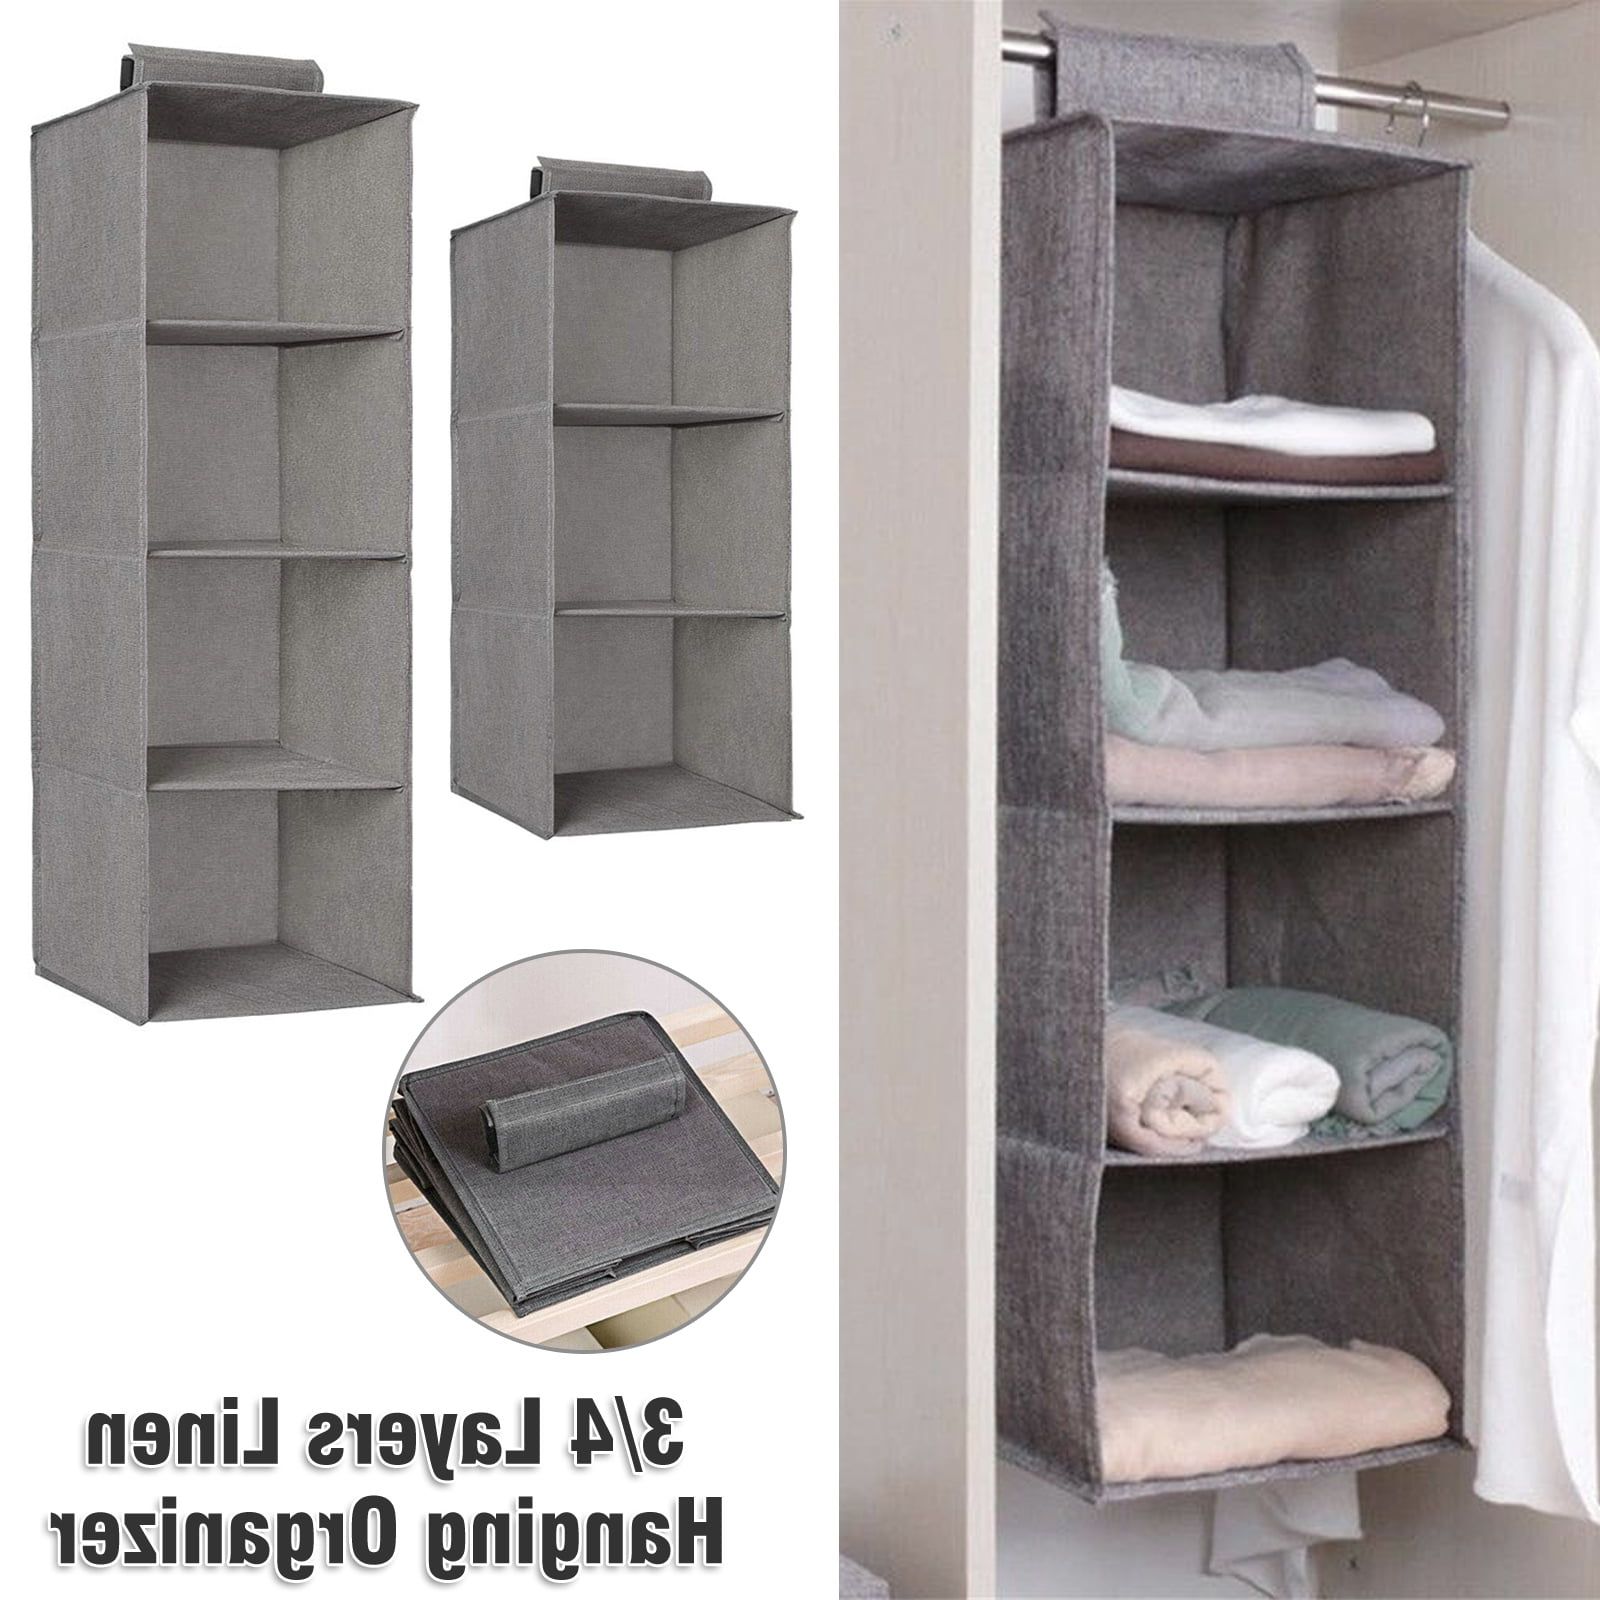 Tsv Hanging Closet Organizer, 3/4 Shelf Hanging Clothes Storage Box  Collapsible Accessory Shelves Hanging Closet Cubby For Sweater & Handbag  Organizer, Dorm Room Closet Organizers And Storage, Gray – Walmart Pertaining To Trendy 3 Shelf Hanging Shelves Wardrobes (View 10 of 10)